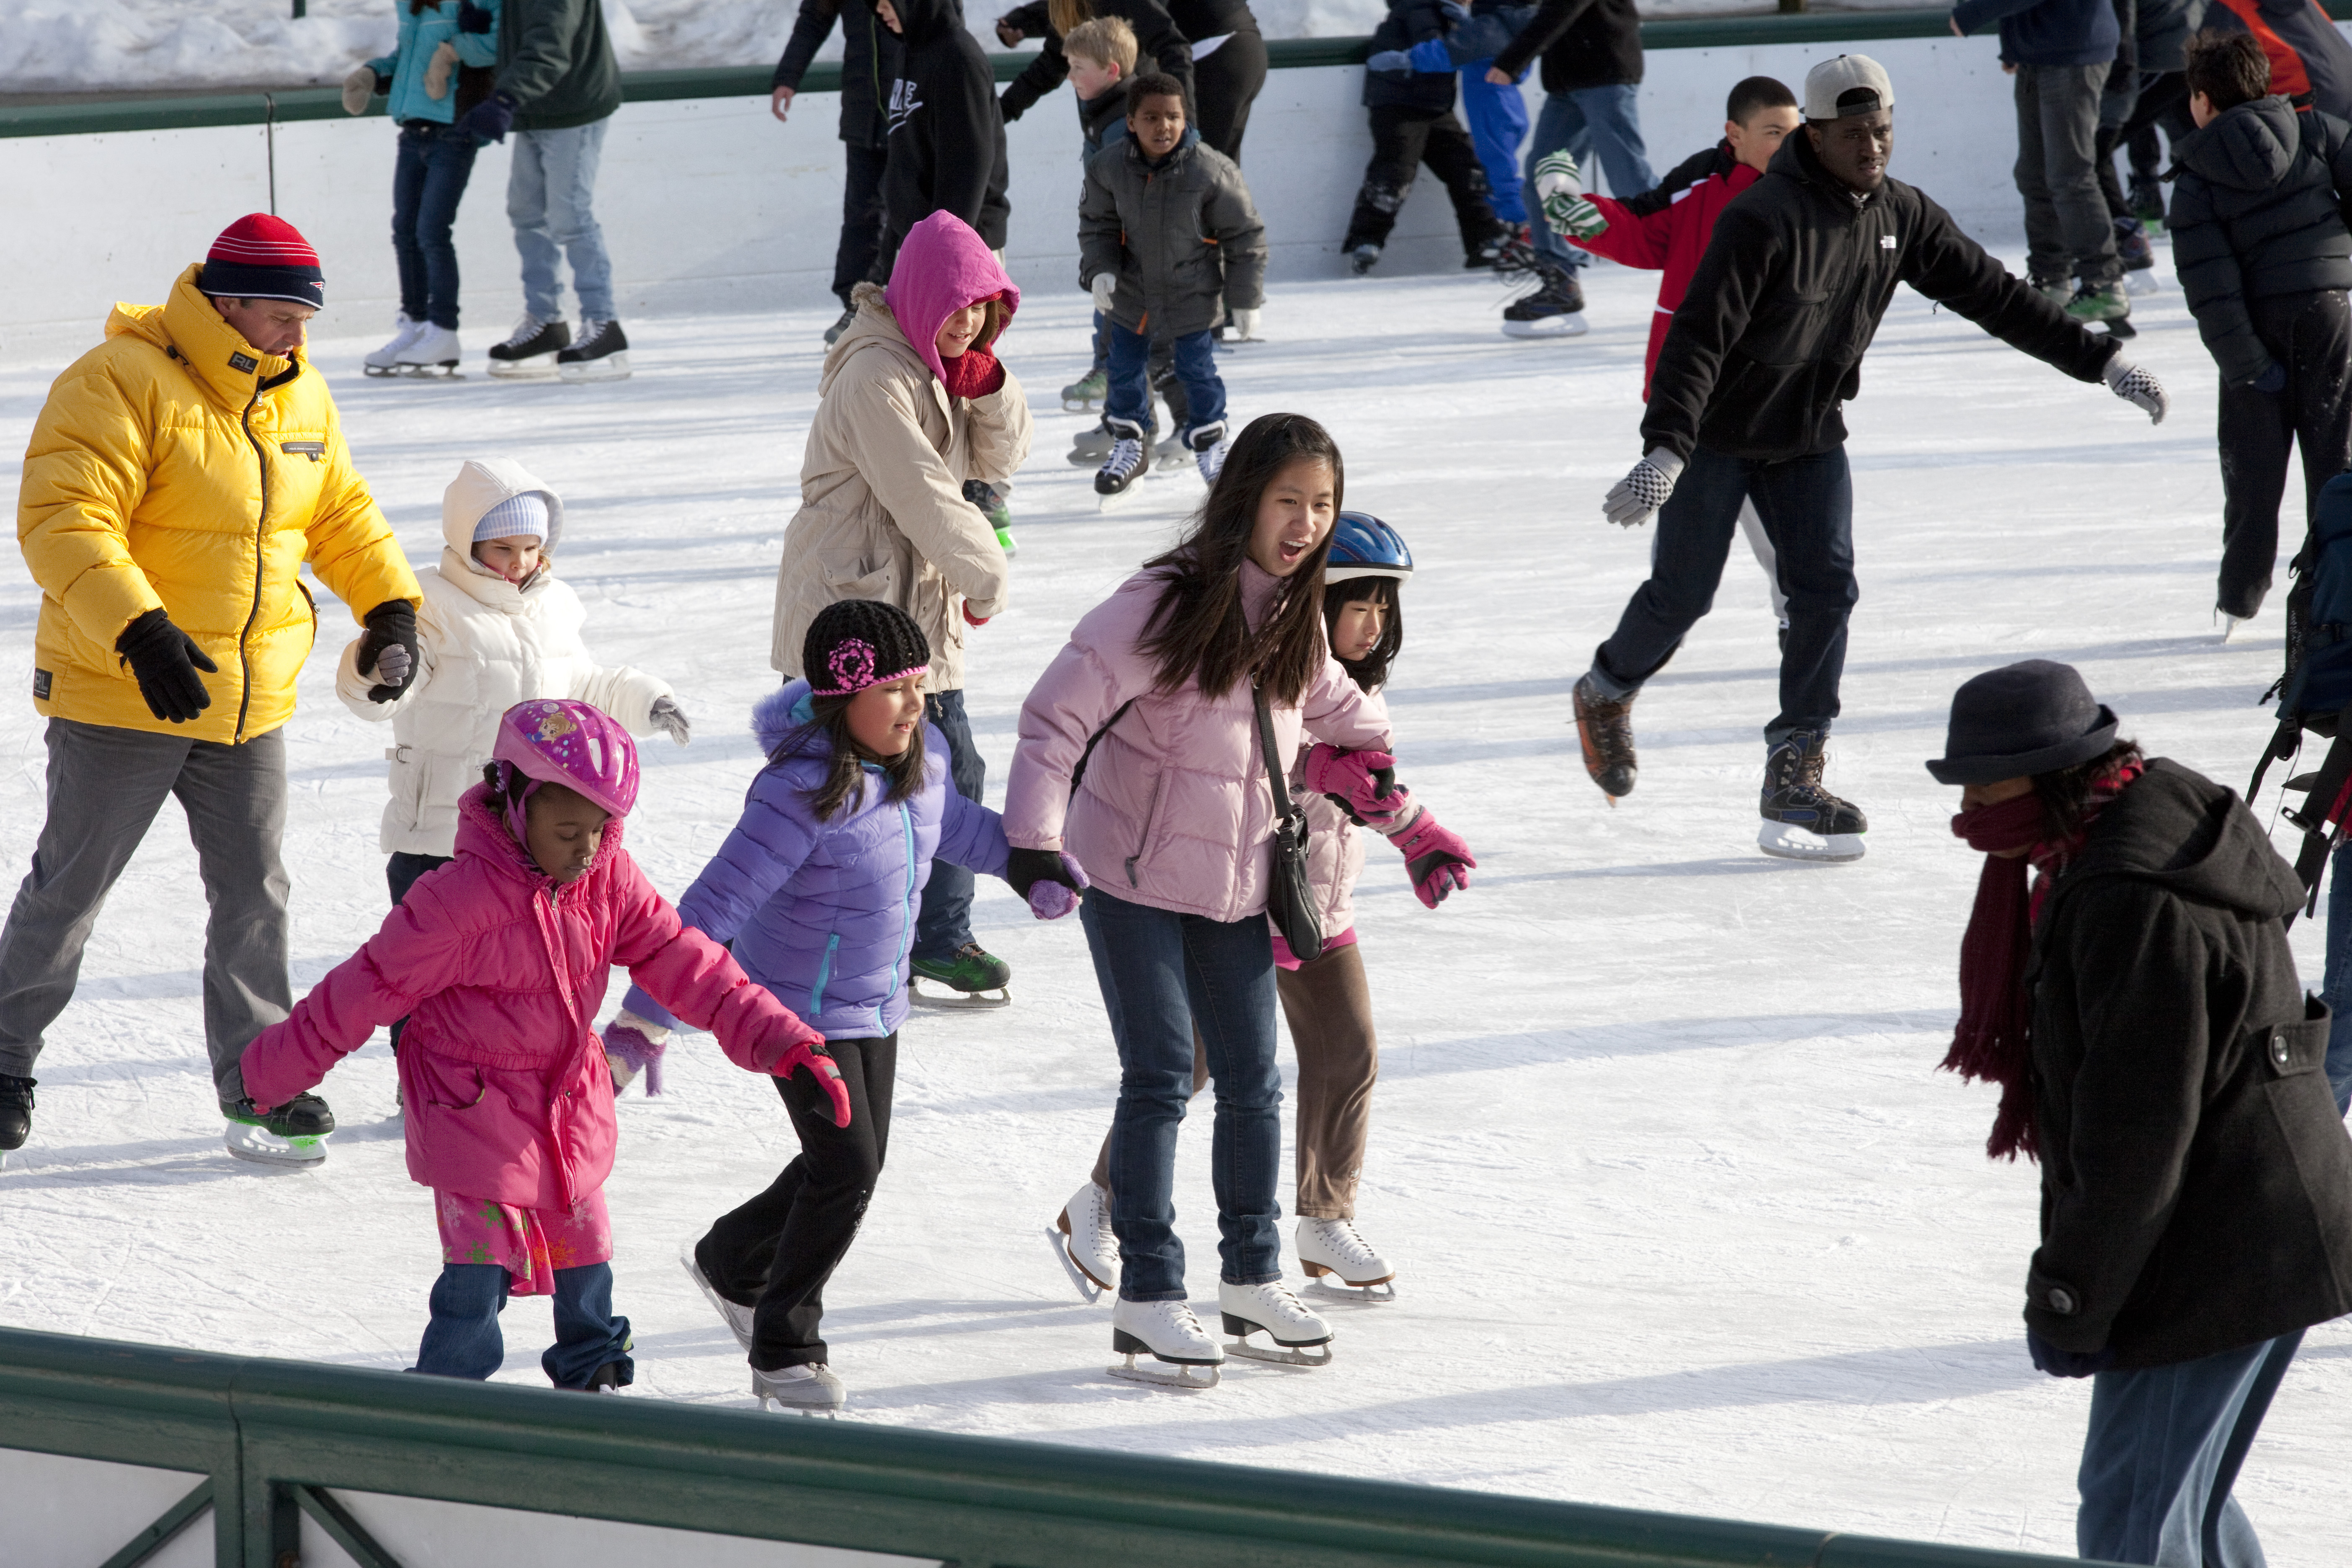 People joining hands and ice-skating on an outside rink.